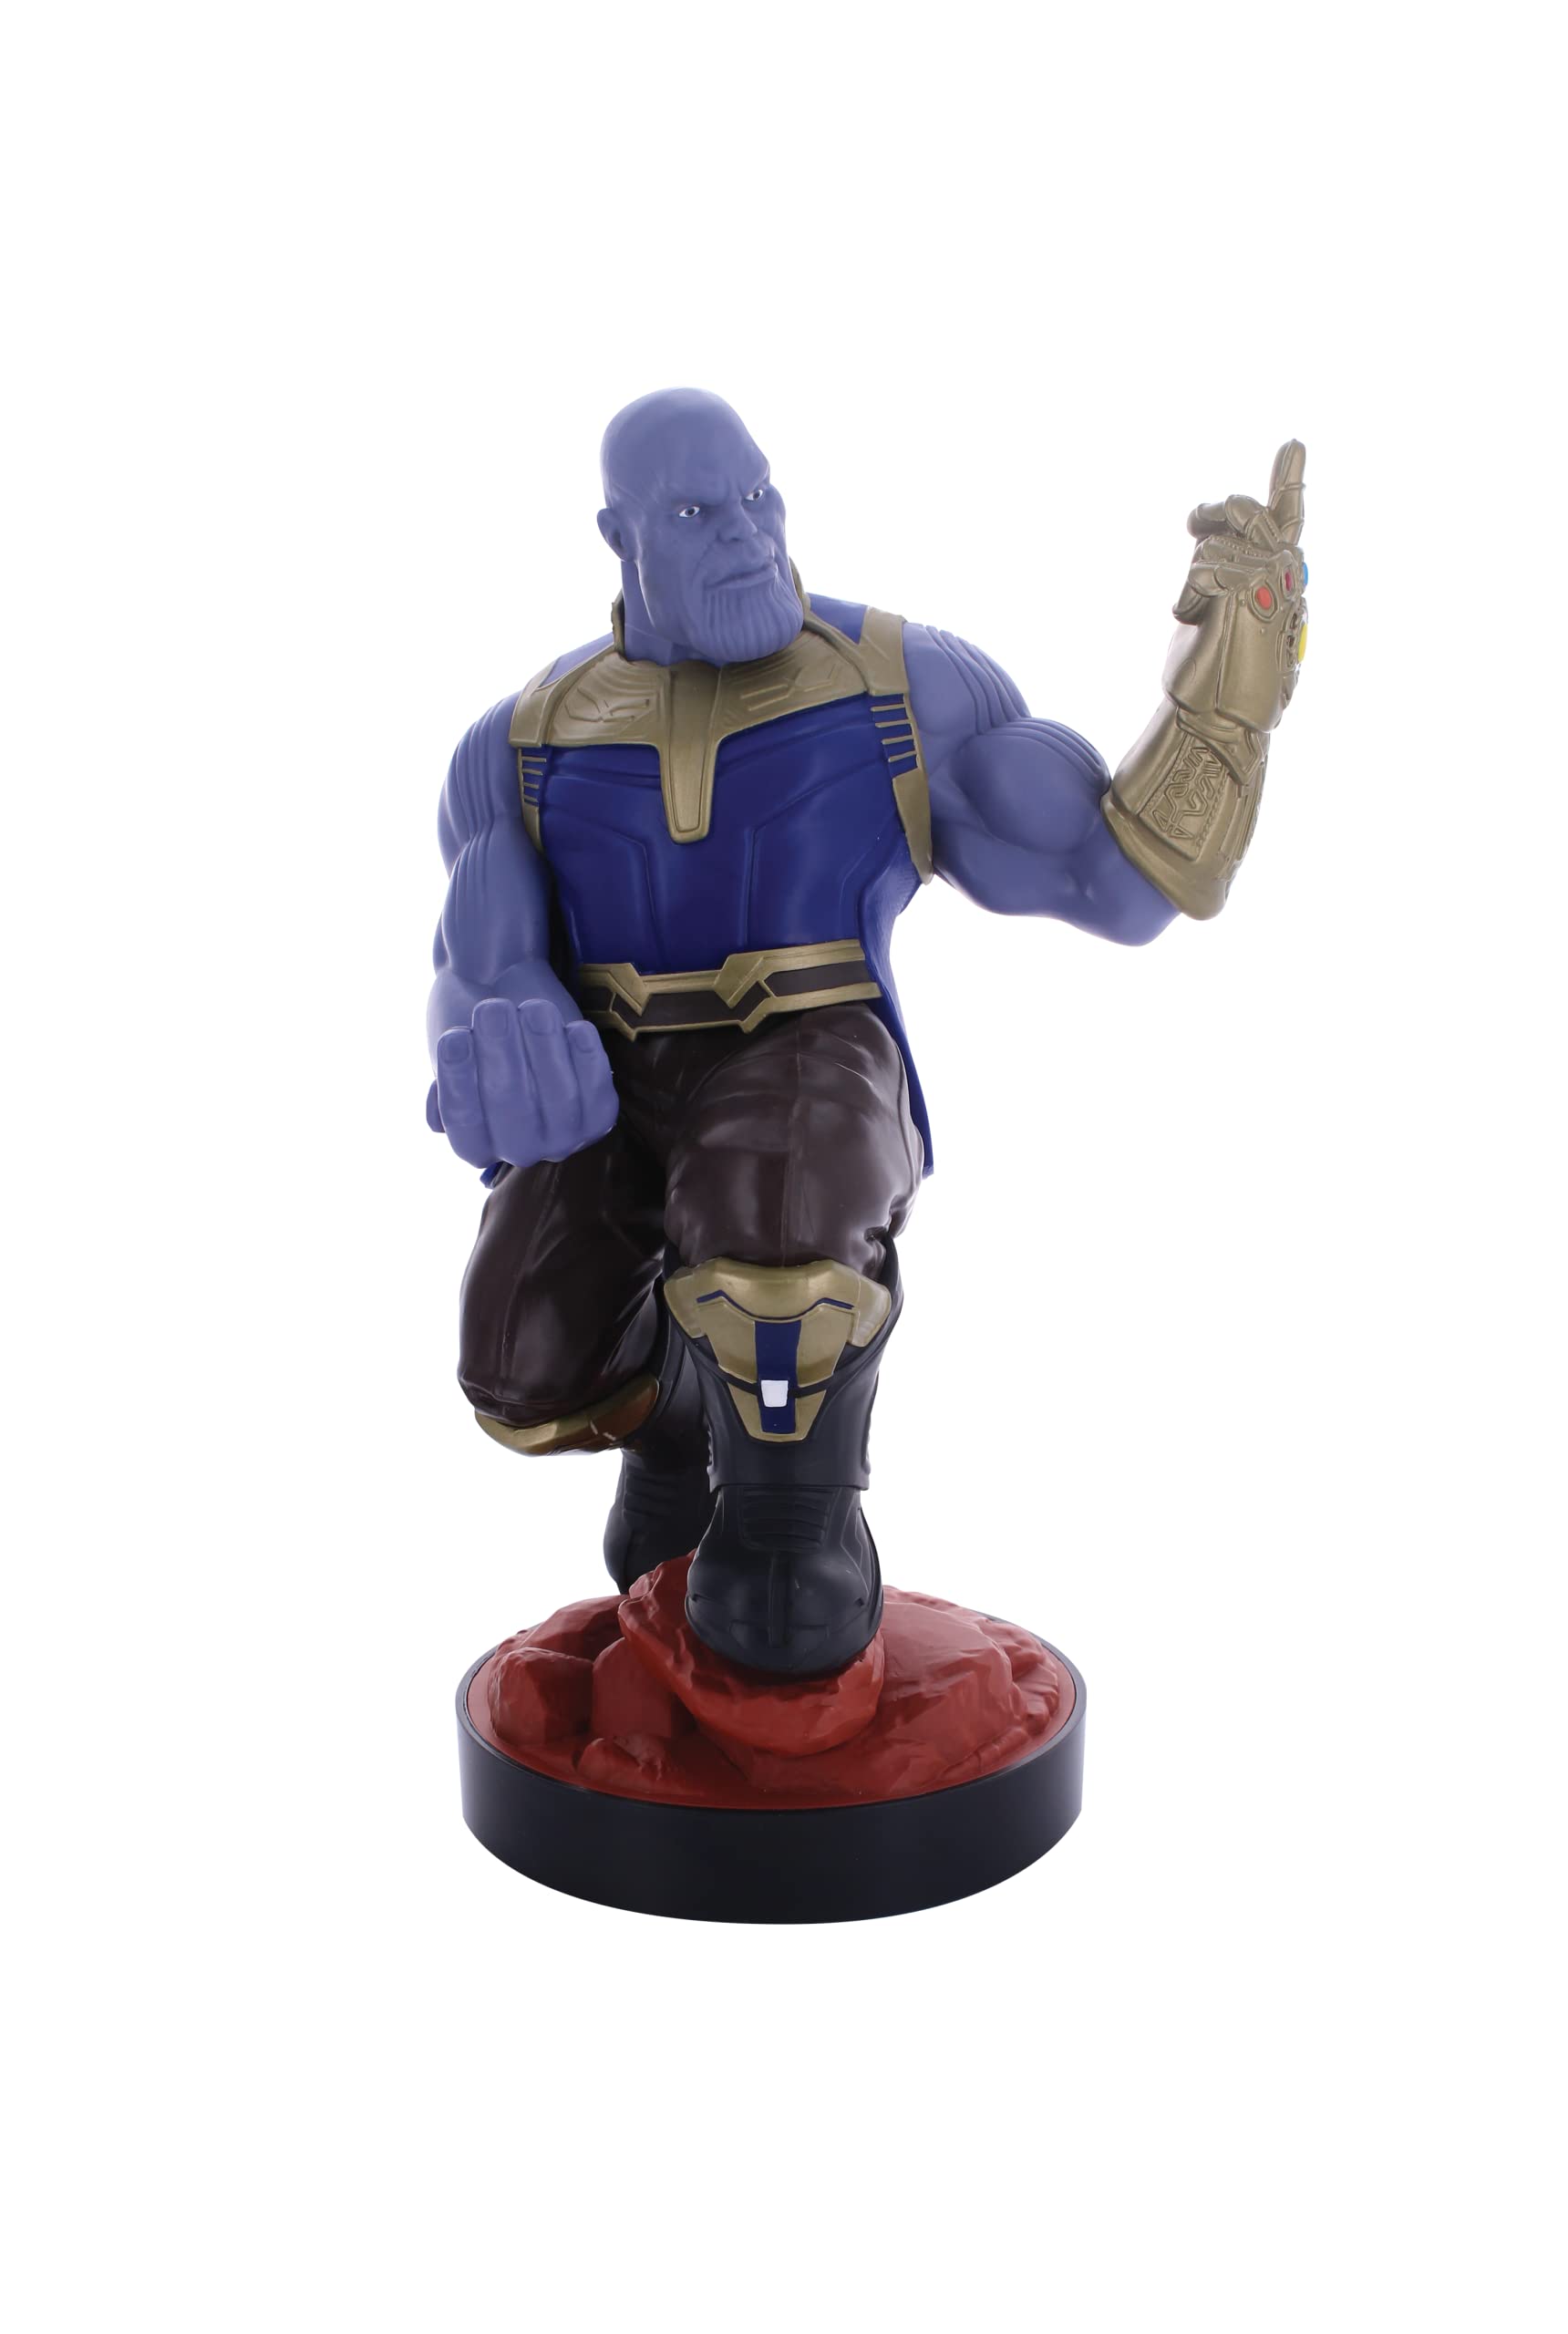 THANOS CABLE GUY